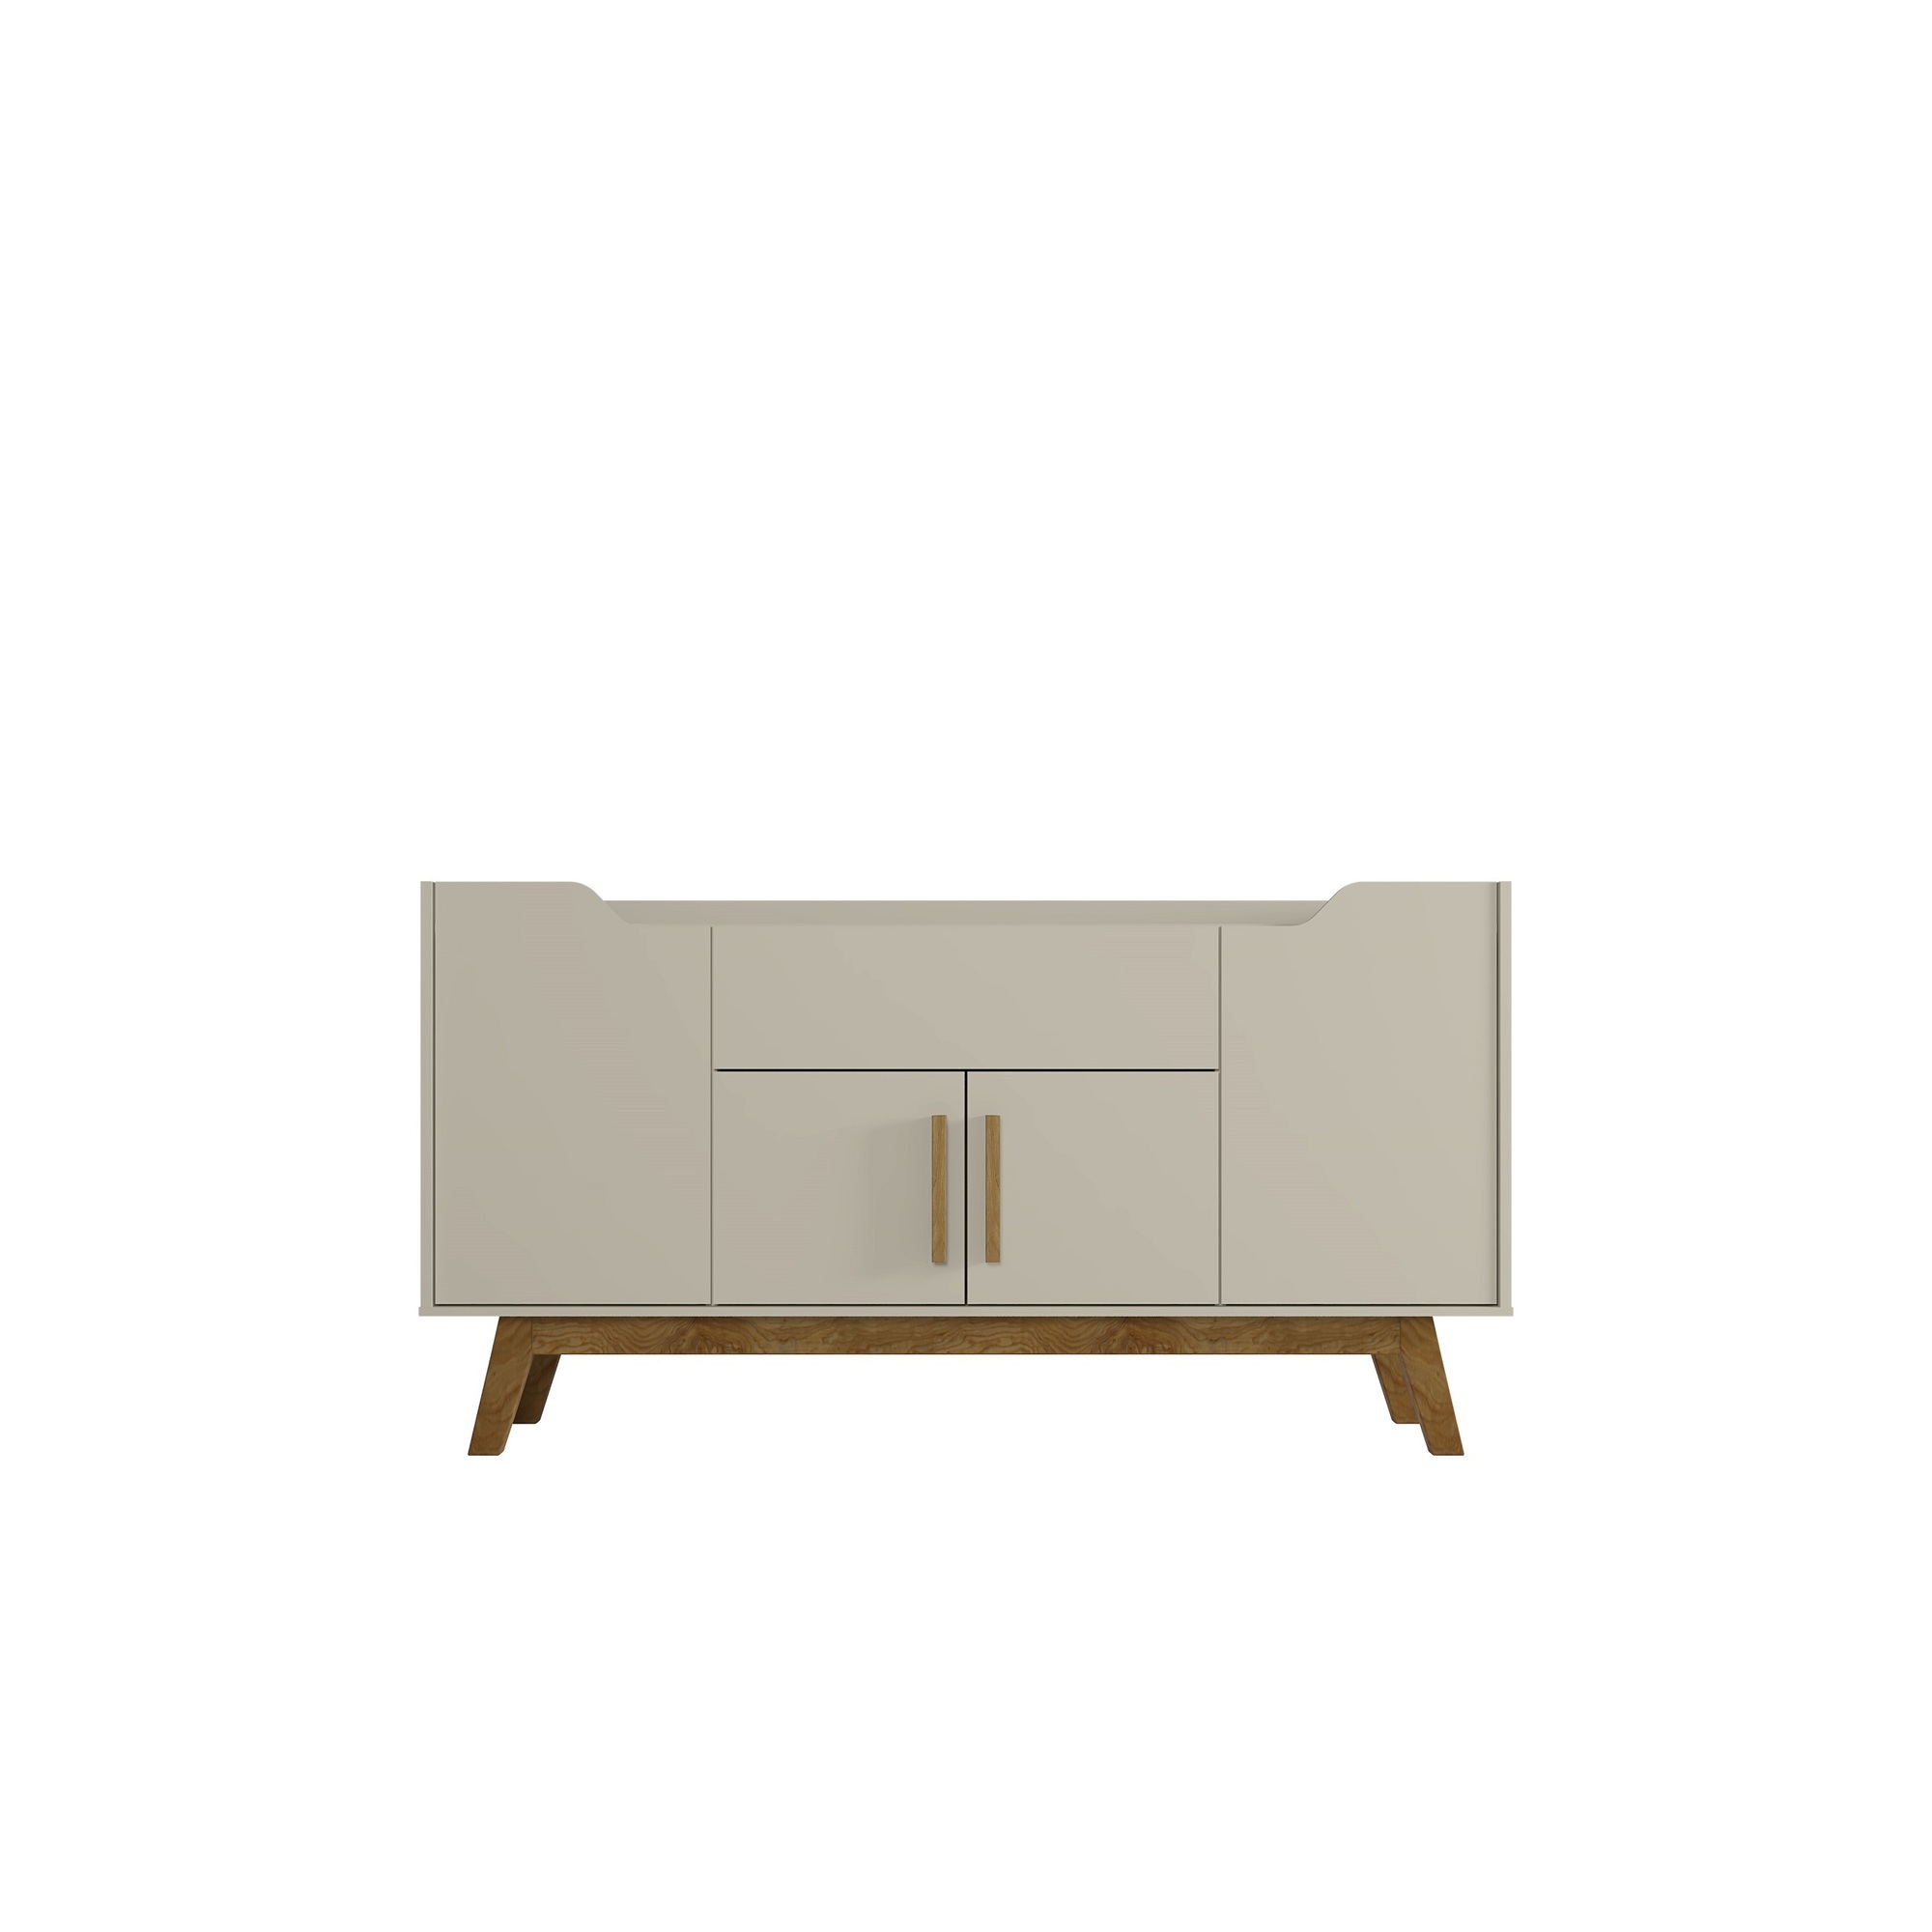 Manhattan Comfort, Addie 53.54 Sideboard with 5 Shelves in Off White, Width 53.54 in, Height 31.89 in, Depth 14.17 in, Model 244BMC